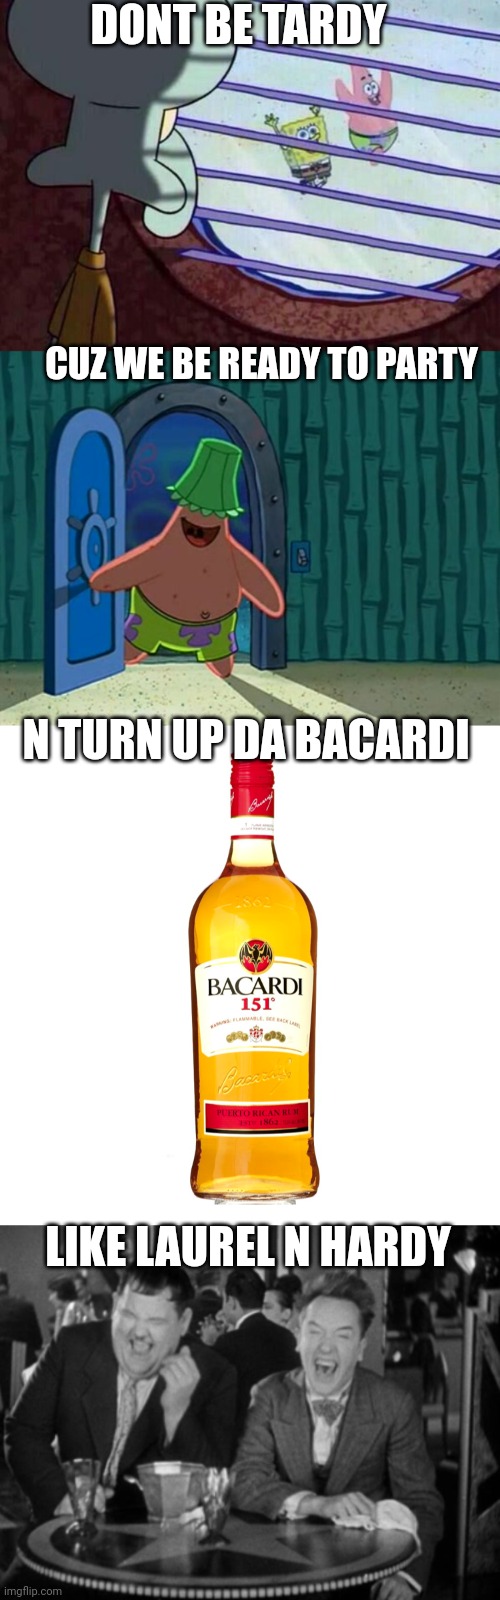 DONT BE TARDY; CUZ WE BE READY TO PARTY; N TURN UP DA BACARDI; LIKE LAUREL N HARDY | image tagged in squidward window,patrick lampshade,bacardi 151,laurel hardy laught | made w/ Imgflip meme maker